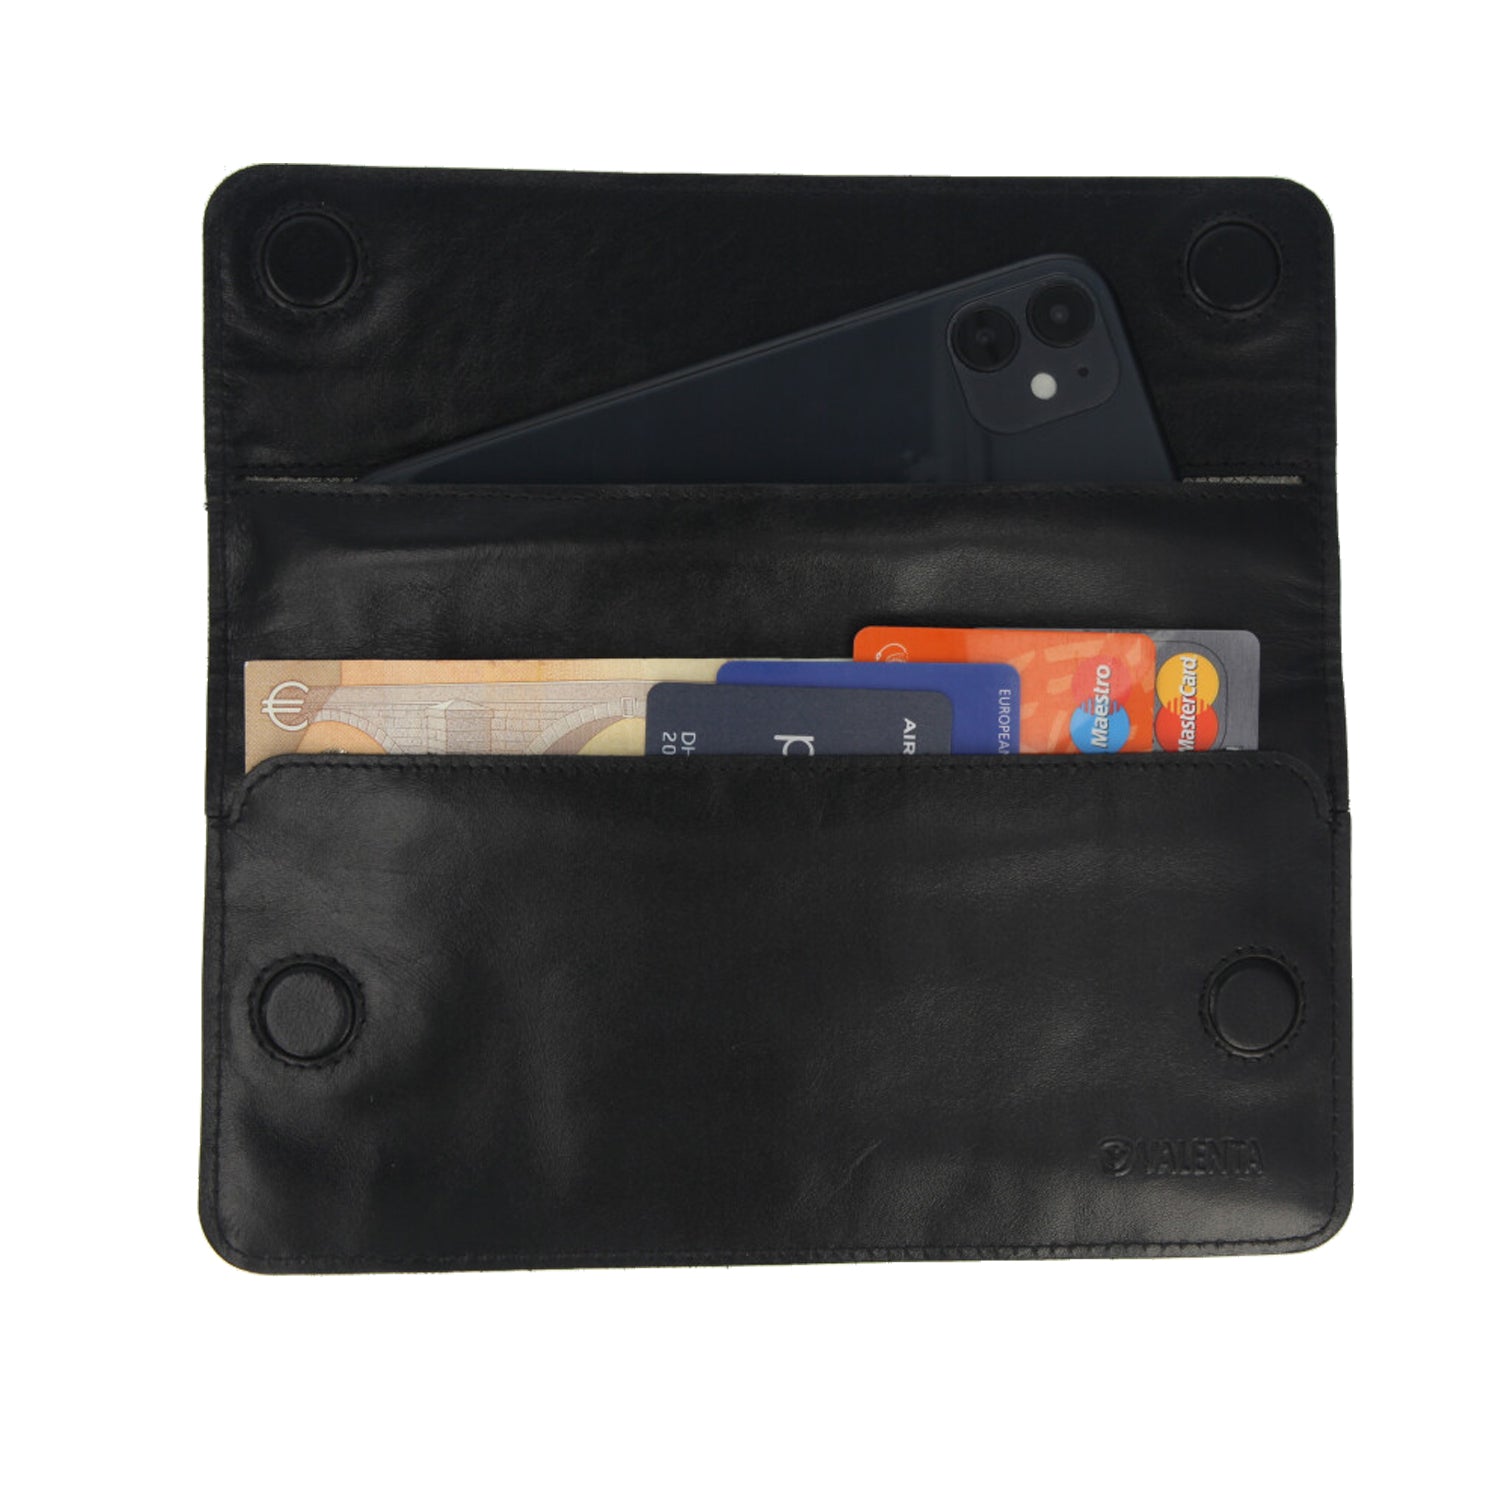 Bag Faraday Phone Pouch Leather Black